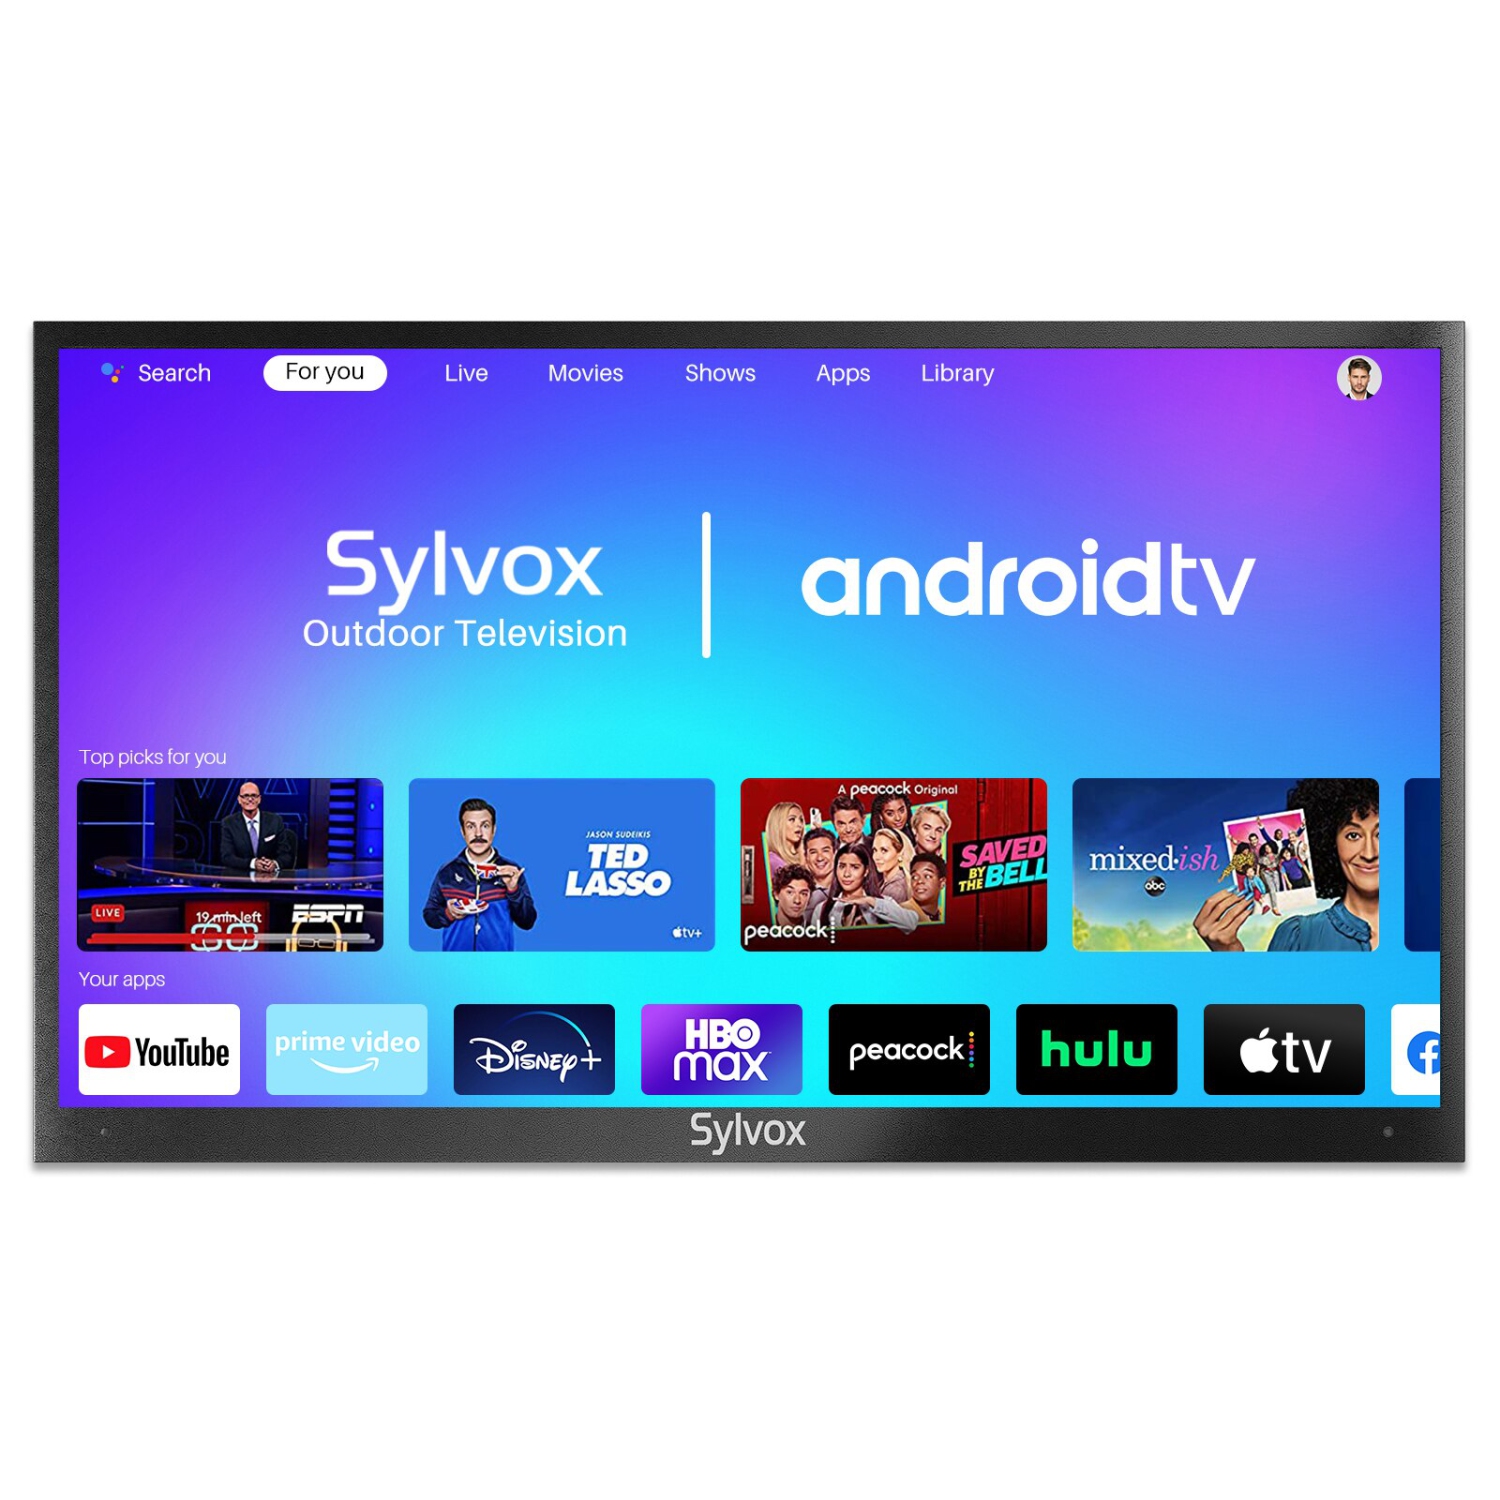 SYLVOX Outdoor TV Deck Pro Series 43" 4K UHD Smart TV with Voice Remote IP55 Waterproo Chromecast Built-in 60Hz Designed for Outdoors